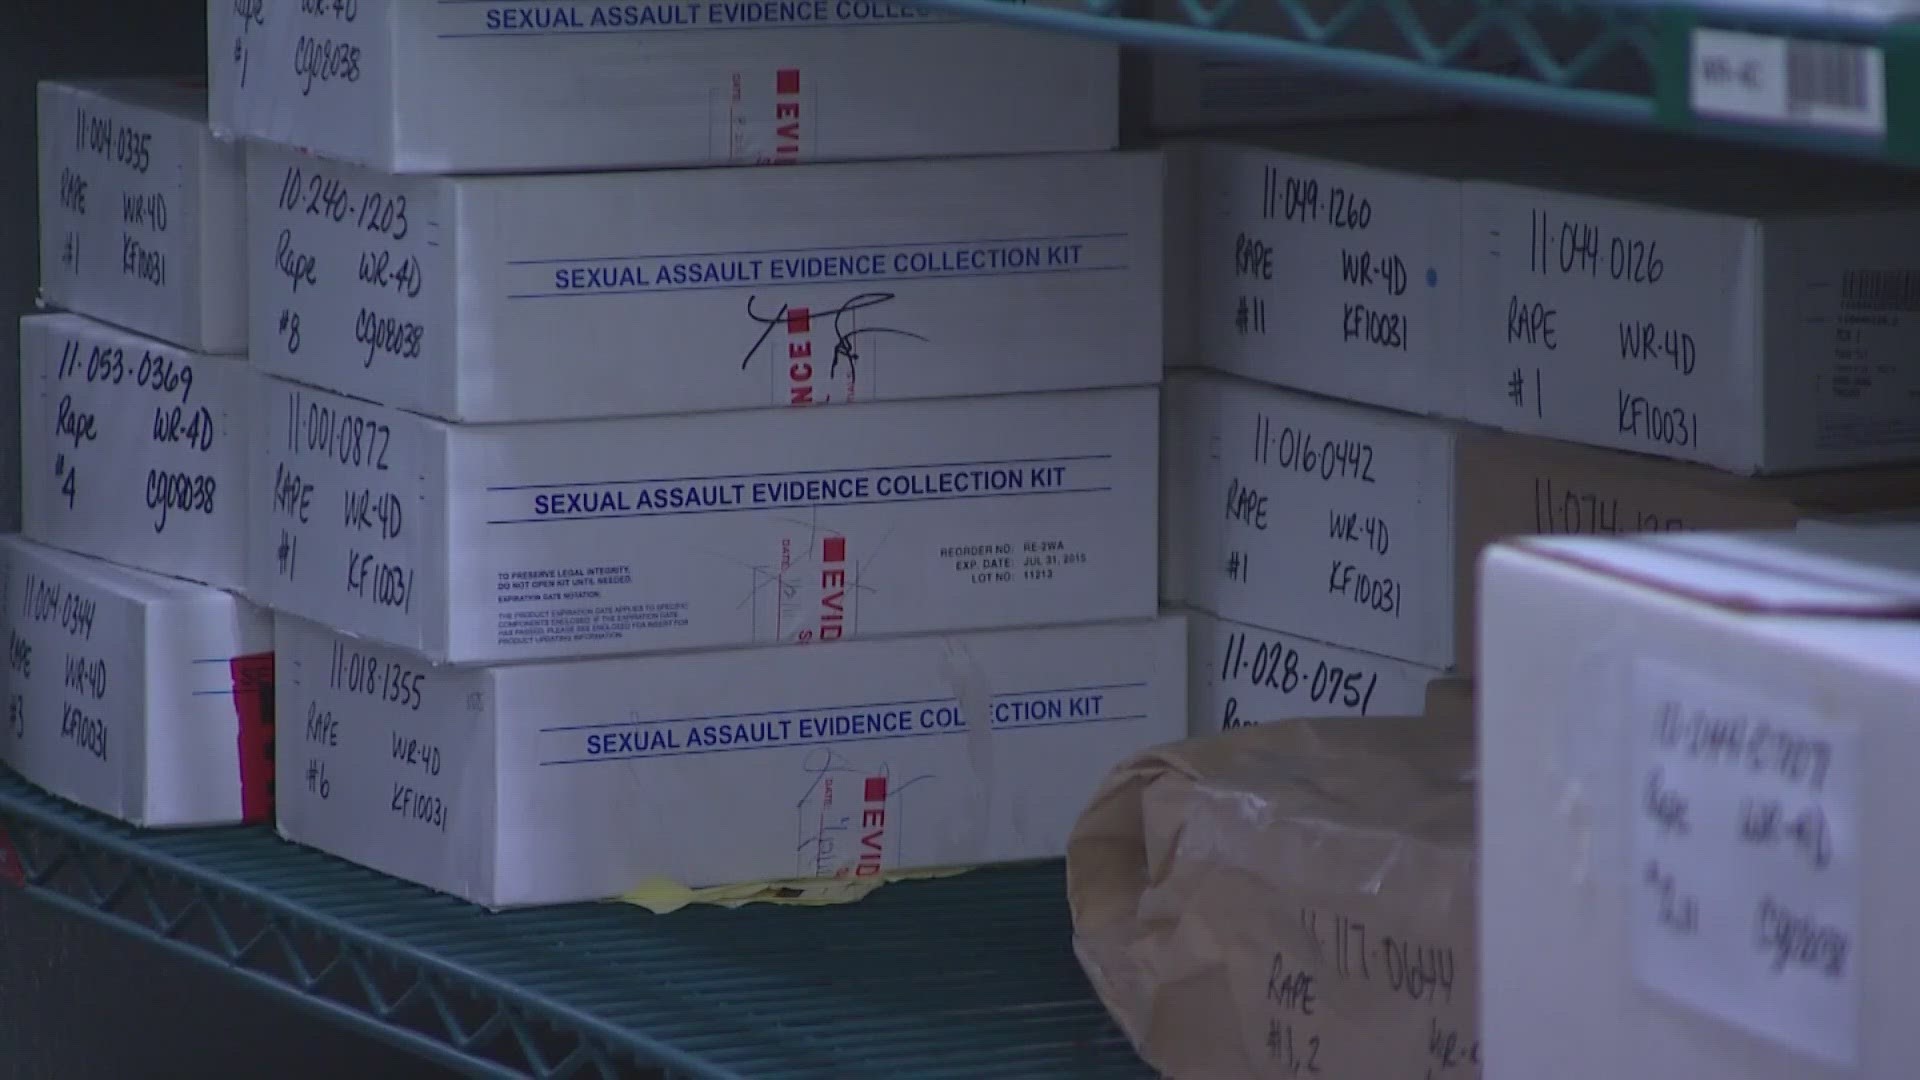 As recently as 2018, there were more than 9,000 sexual assault kits that had not been tested.